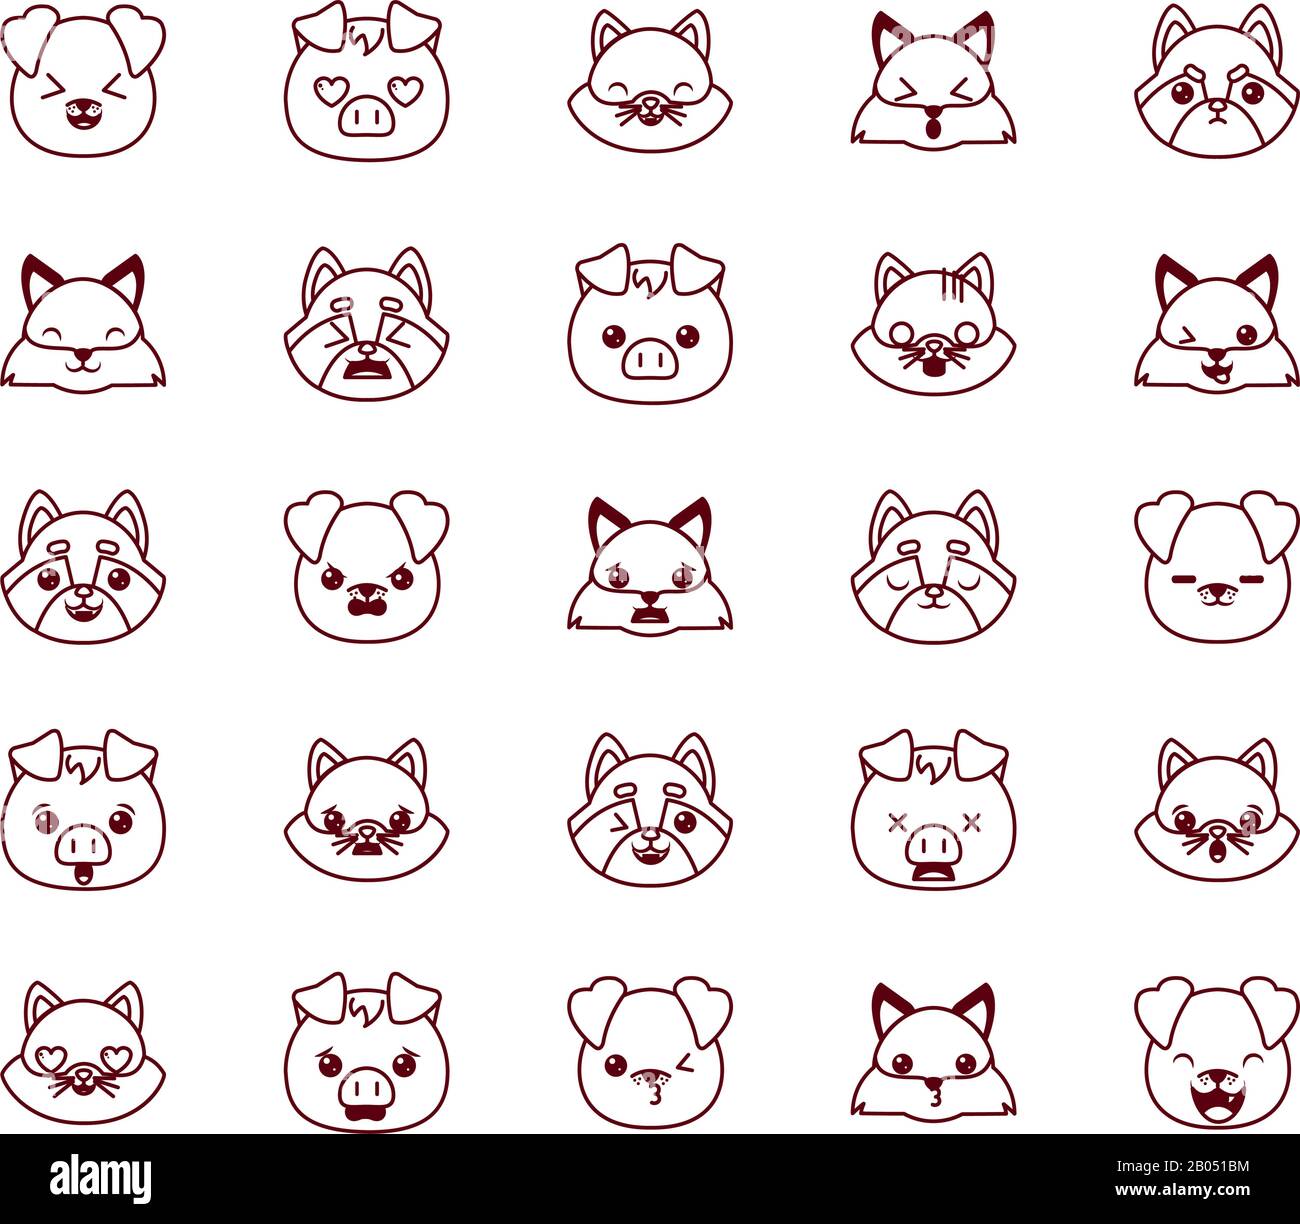 Isolated Cute Angry Cat Emoji Stock Vector - Illustration of emoticon,  avatar: 225027930